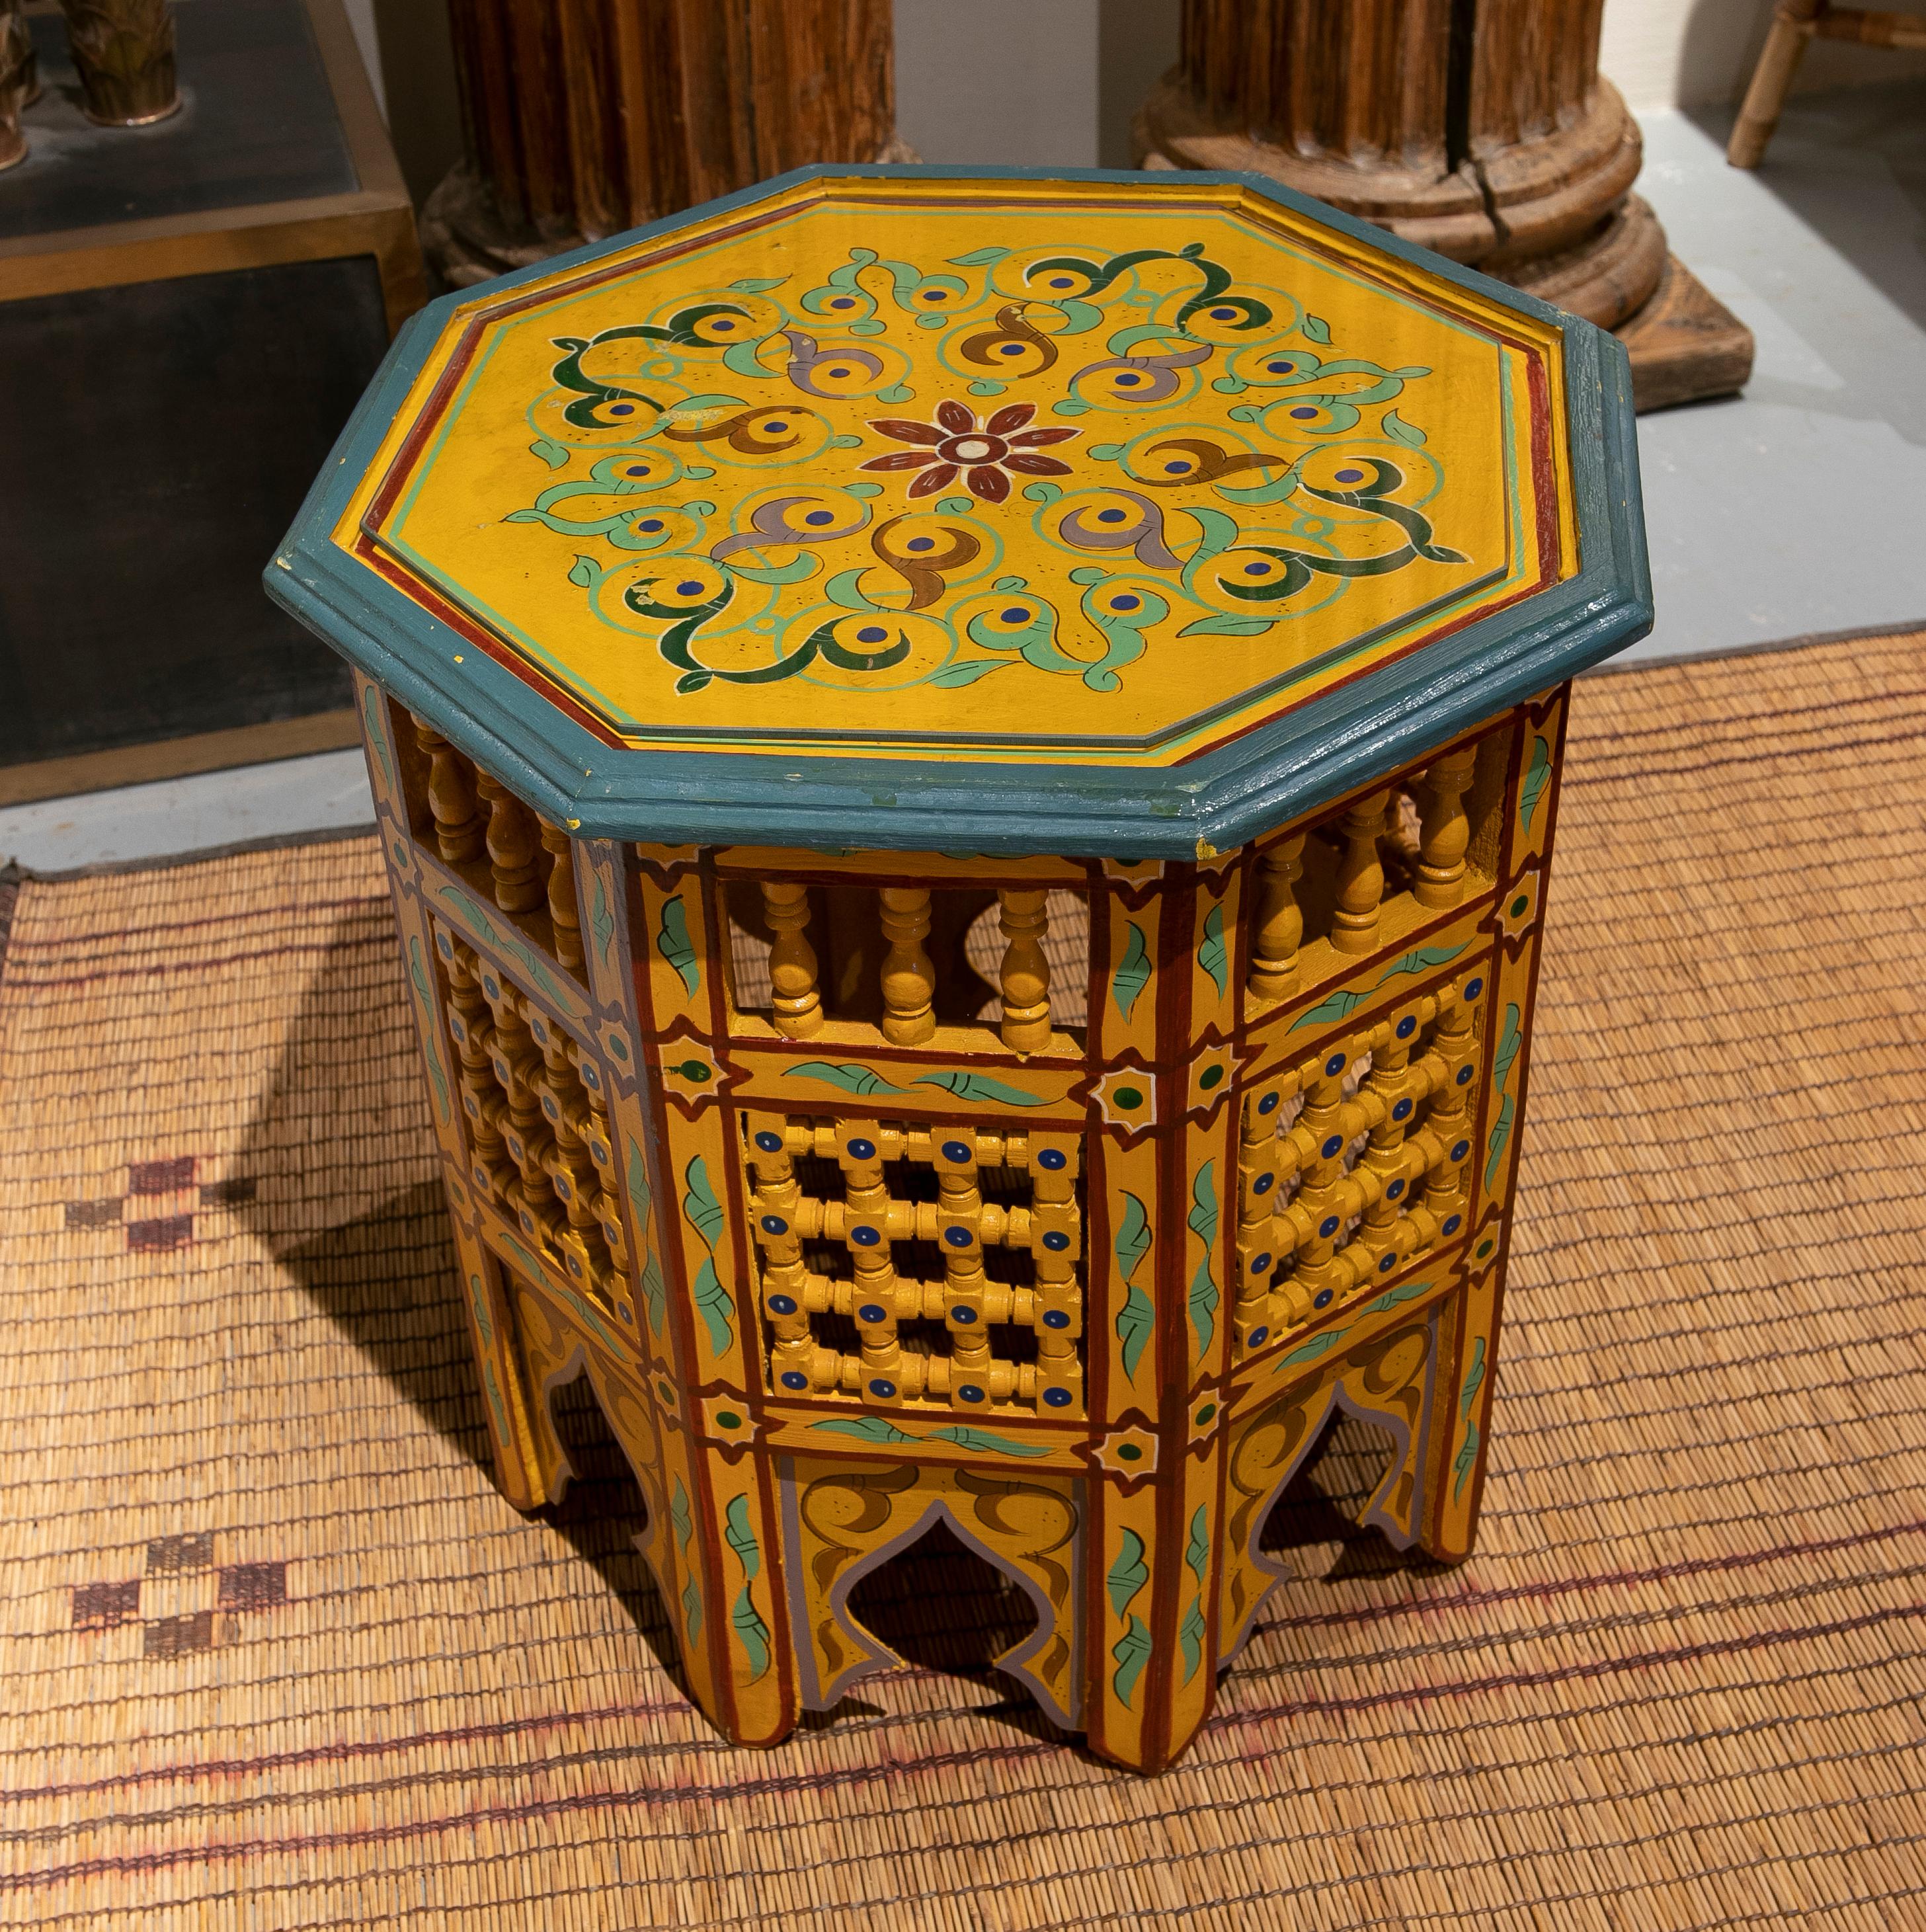 Hand-Painted Octagonal wooden sidetable handpainted in yellow and green